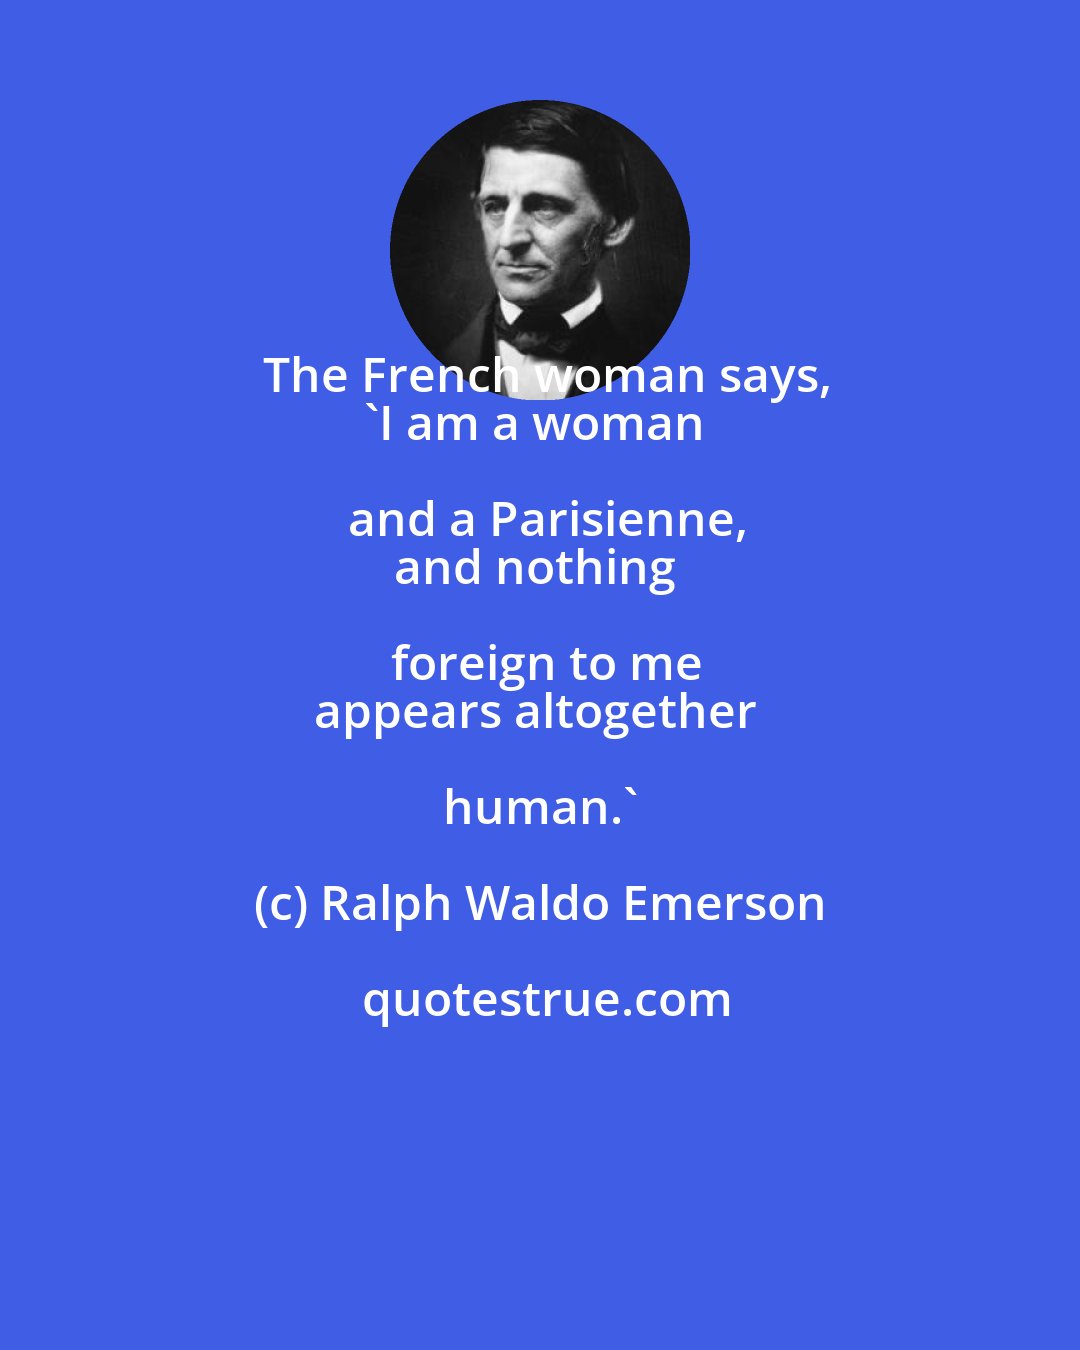 Ralph Waldo Emerson: The French woman says,
'I am a woman and a Parisienne,
and nothing foreign to me
appears altogether human.'